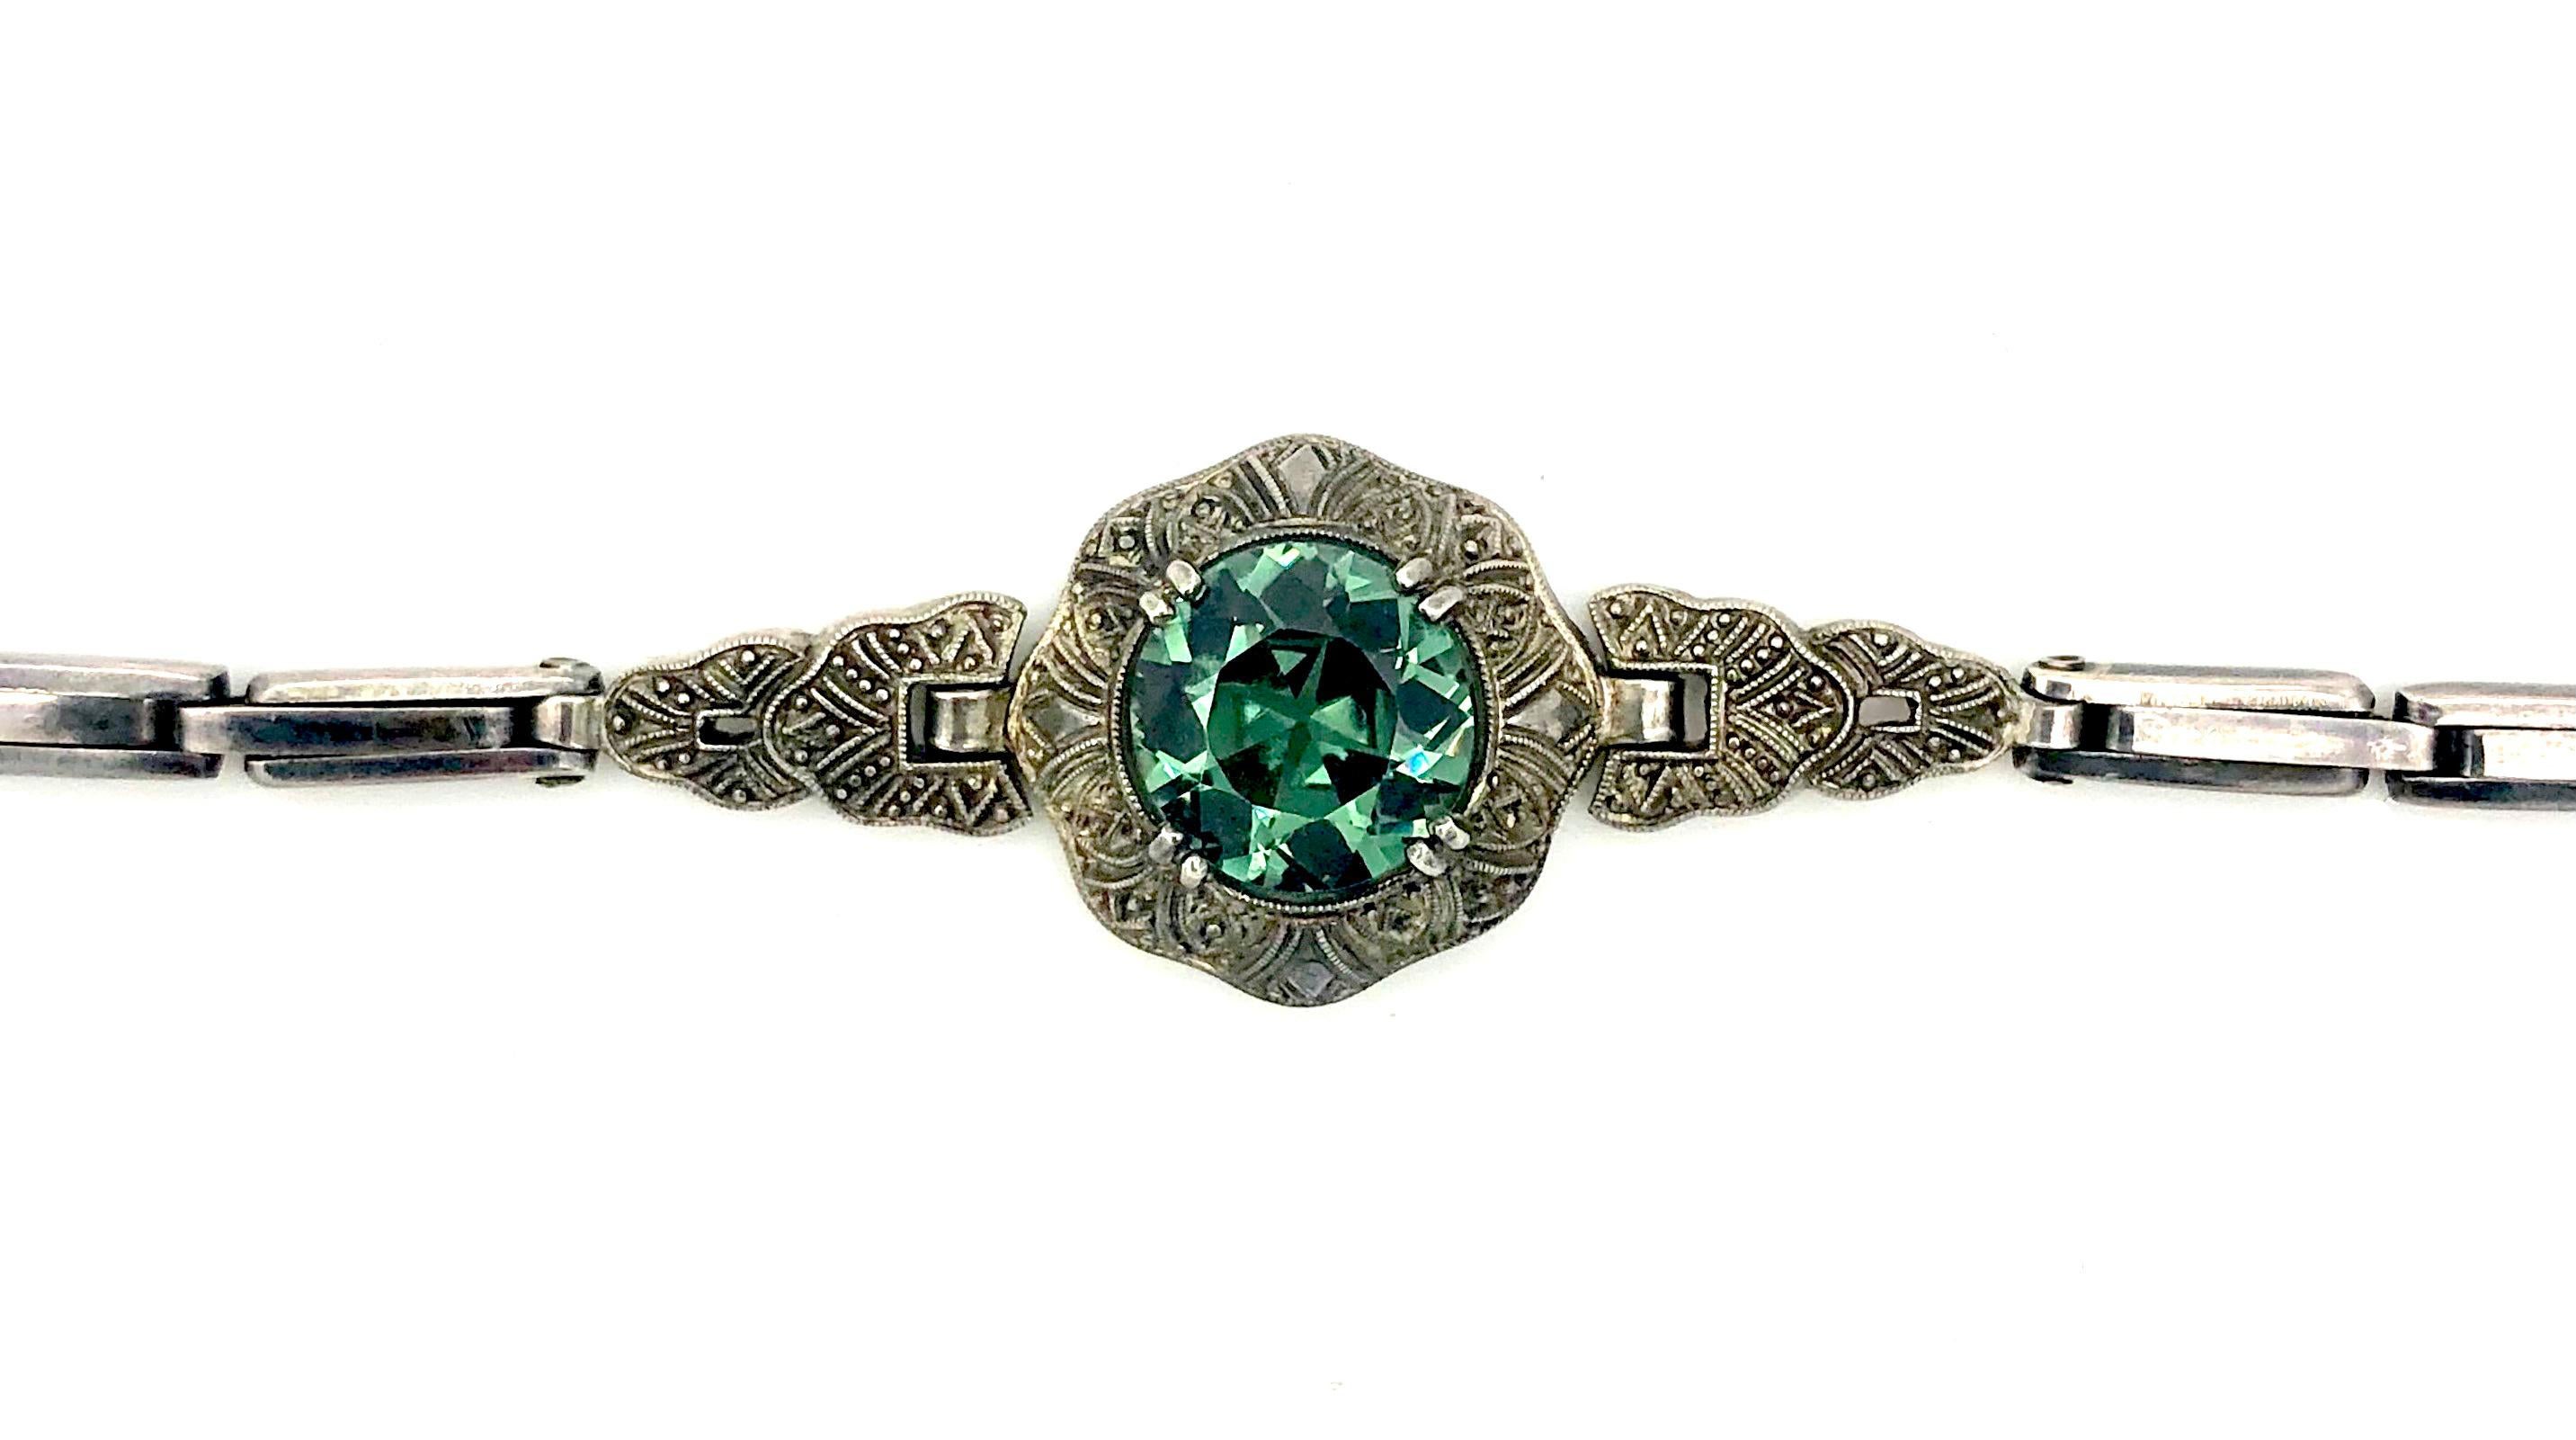 Antique Art Deco Fexible Link Bracelet Sterling Silver Green Glass In Good Condition For Sale In Munich, Bavaria